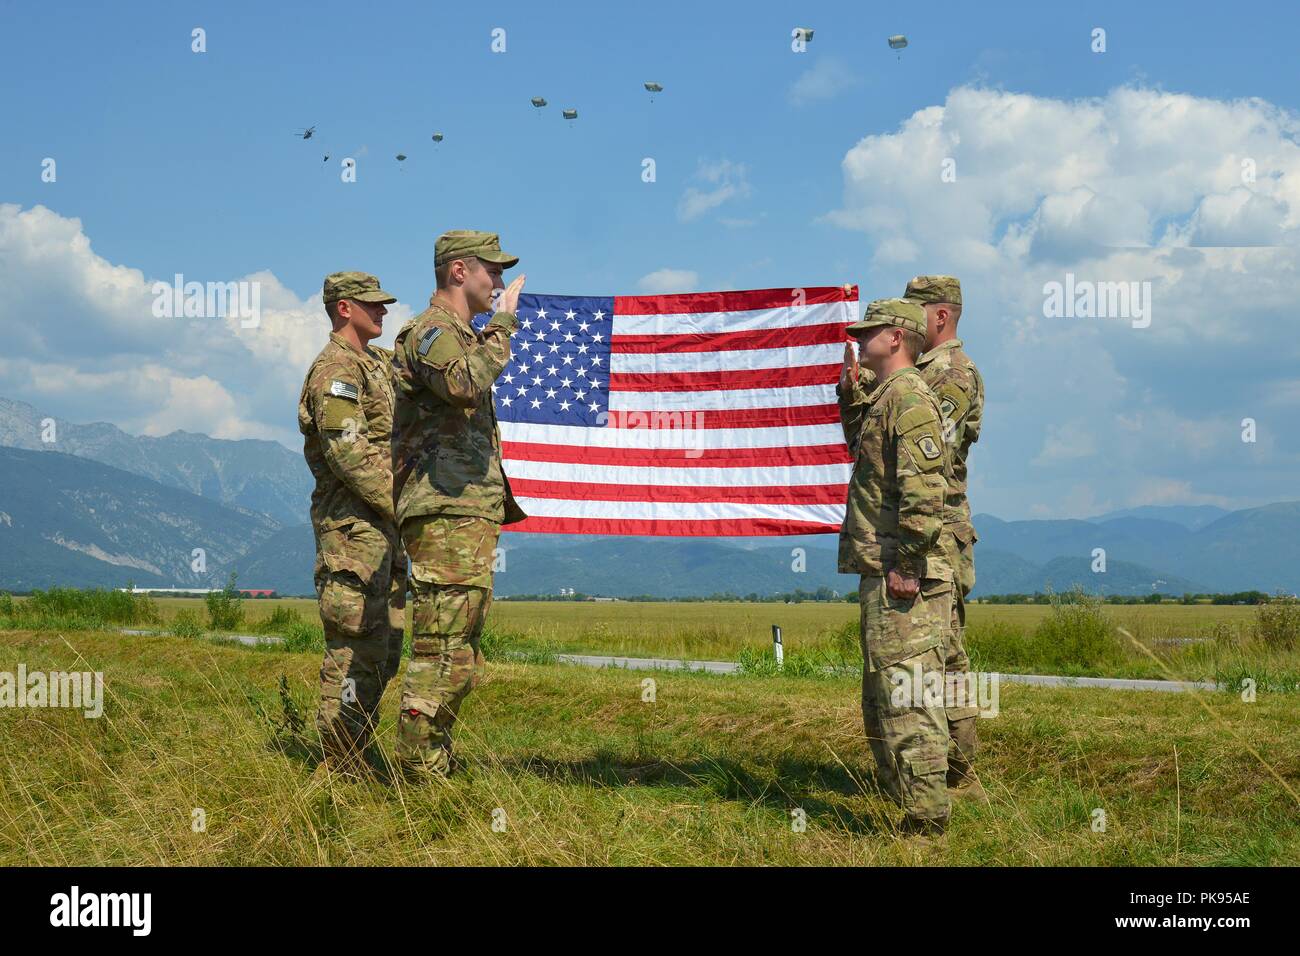 During a airborne operation, Staff Sgt. Daniel Clark (right) assigned to the 2nd Battalion, 503rd Infantry Regiment, 173rd Airborne Brigade, swears the oath of re-enlistment to 2nd Lt. Jack Barnett (left) at Juliet Drop Zone, Pordenone, Italy, August 22, 2018, August 22, 2018. The 173rd Airborne Brigade is the U.S. Army Contingency Response Force in Europe, capable of projecting ready forces anywhere in the U.S. European, Africa or Central Commands' areas of responsibility. (U.S. Army photo by Paolo Bovo). () Stock Photo